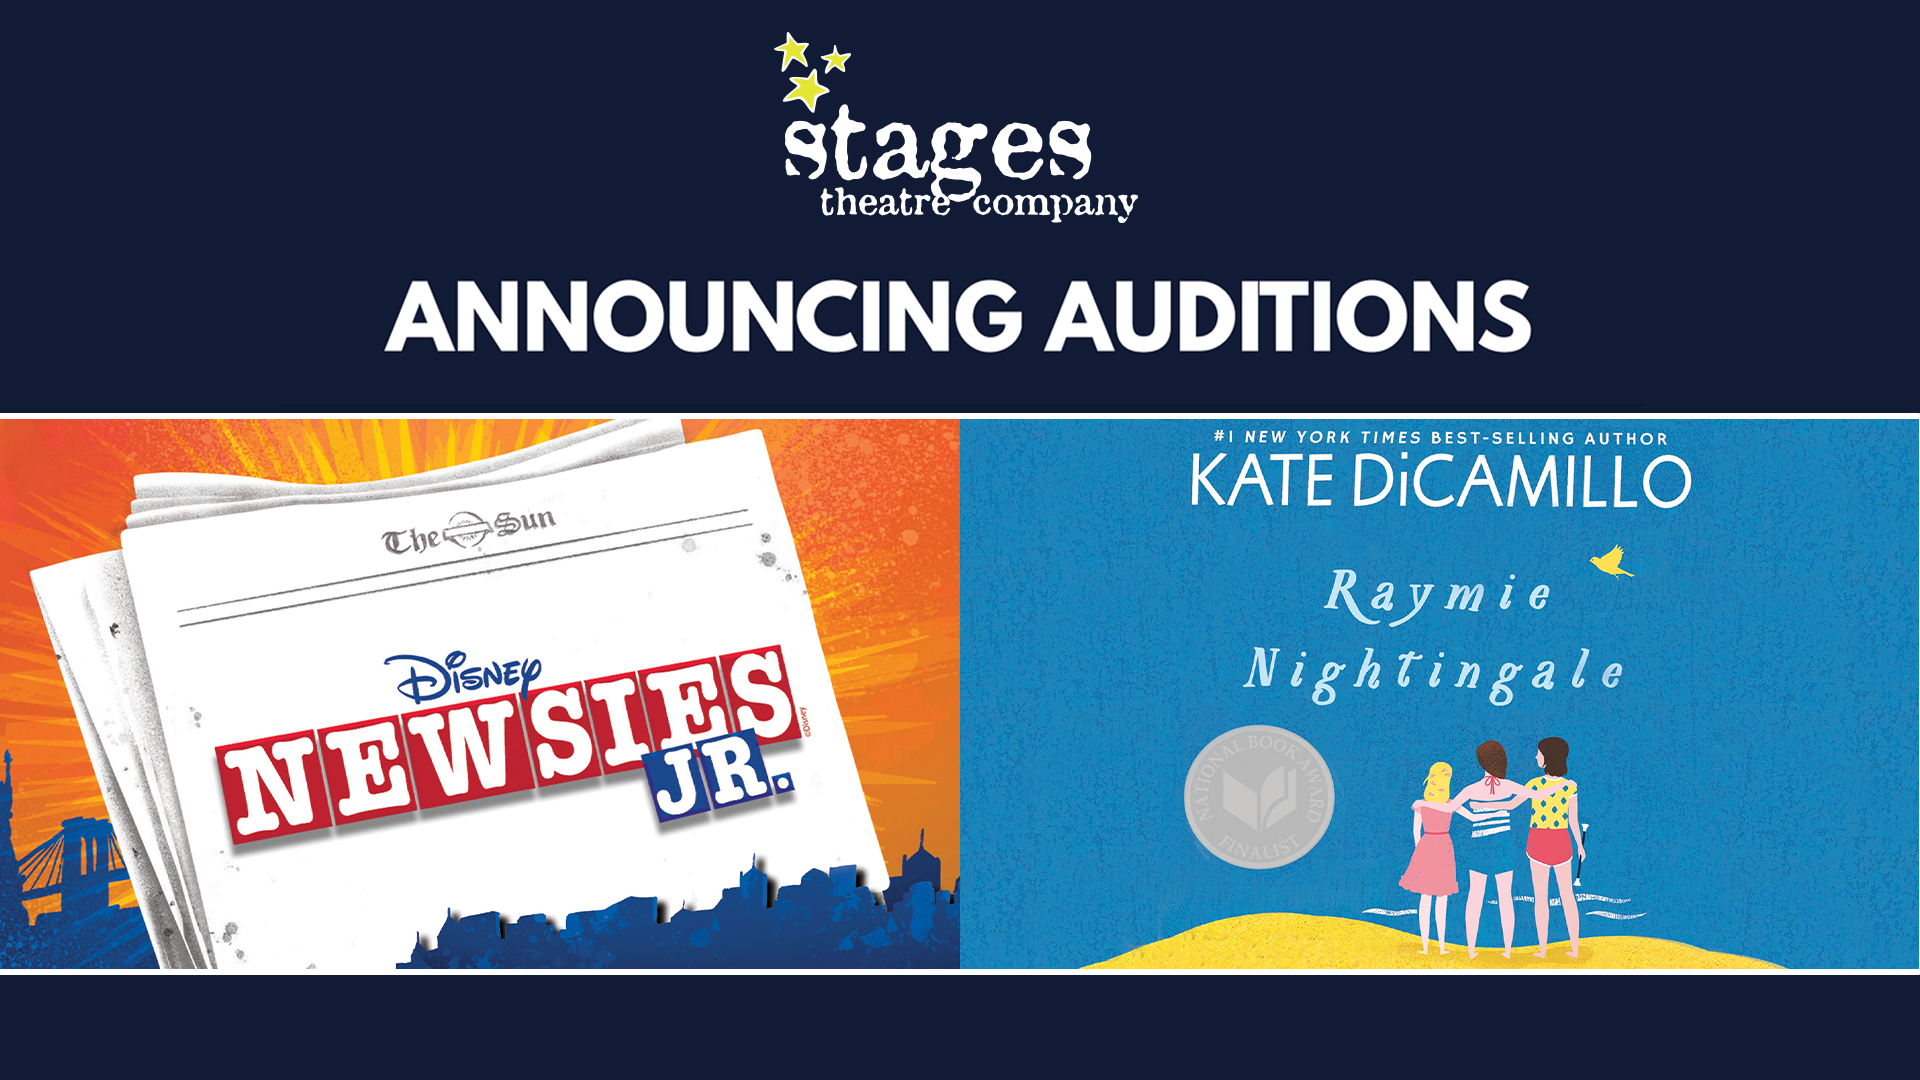 Auditions for Newsies and Raymie Nightingale